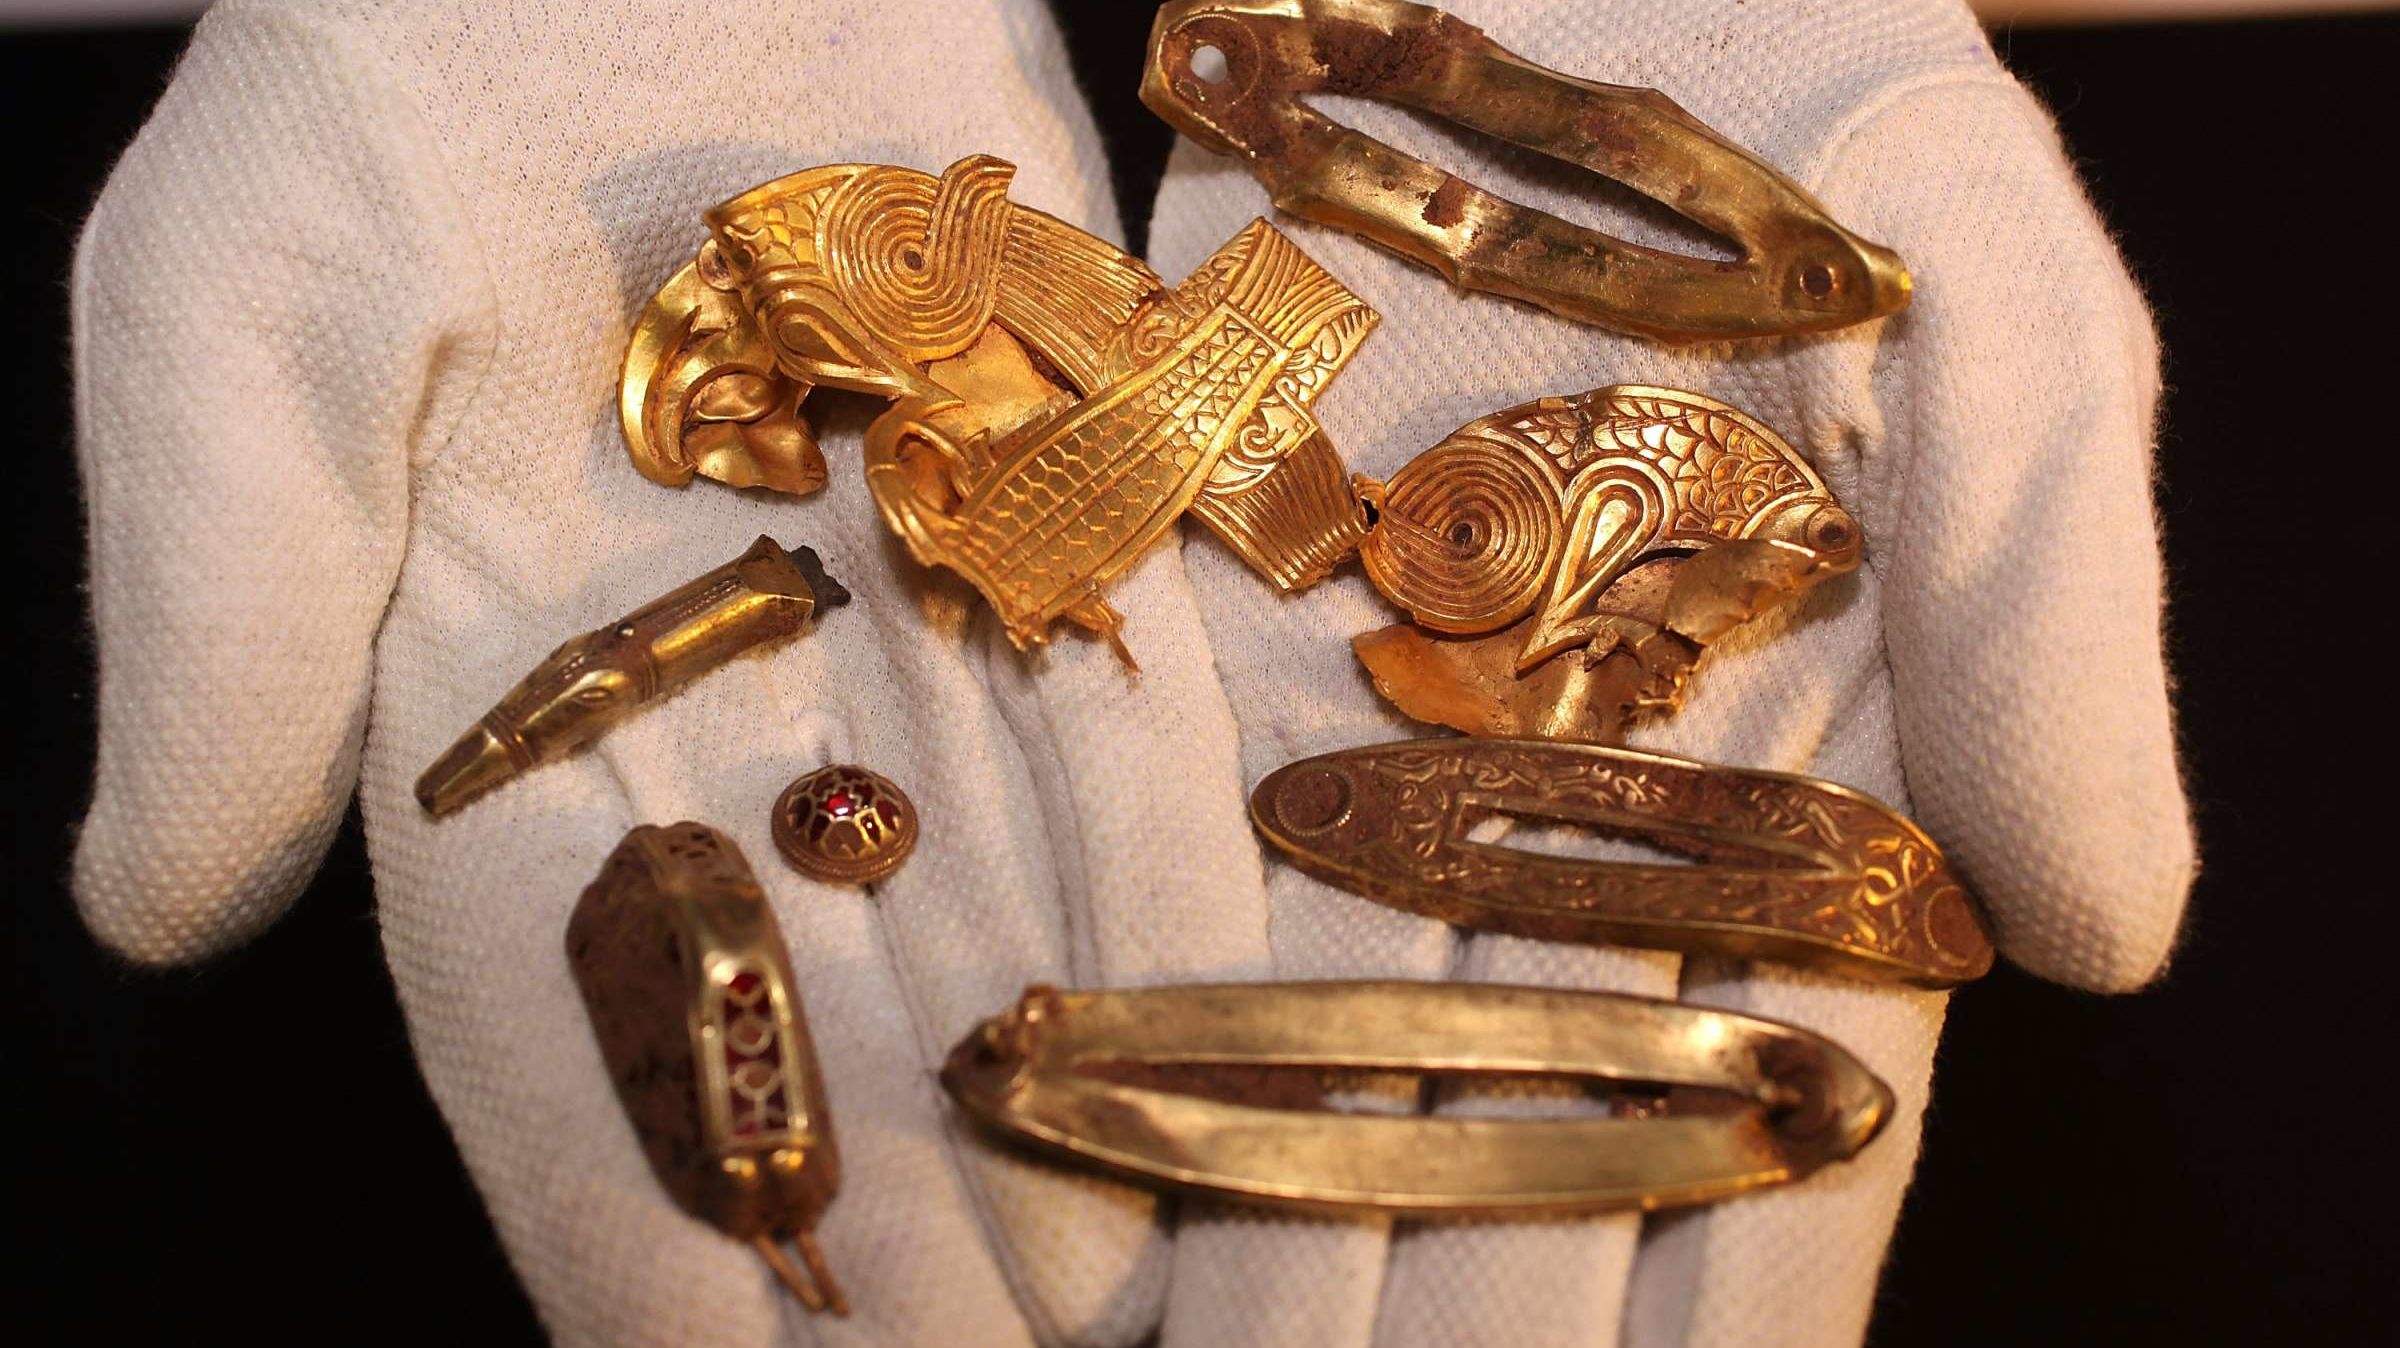  A photo of a gloved hand holding several gold and silver artifacts discovered by Polish archaeologist Romuald Ościak.